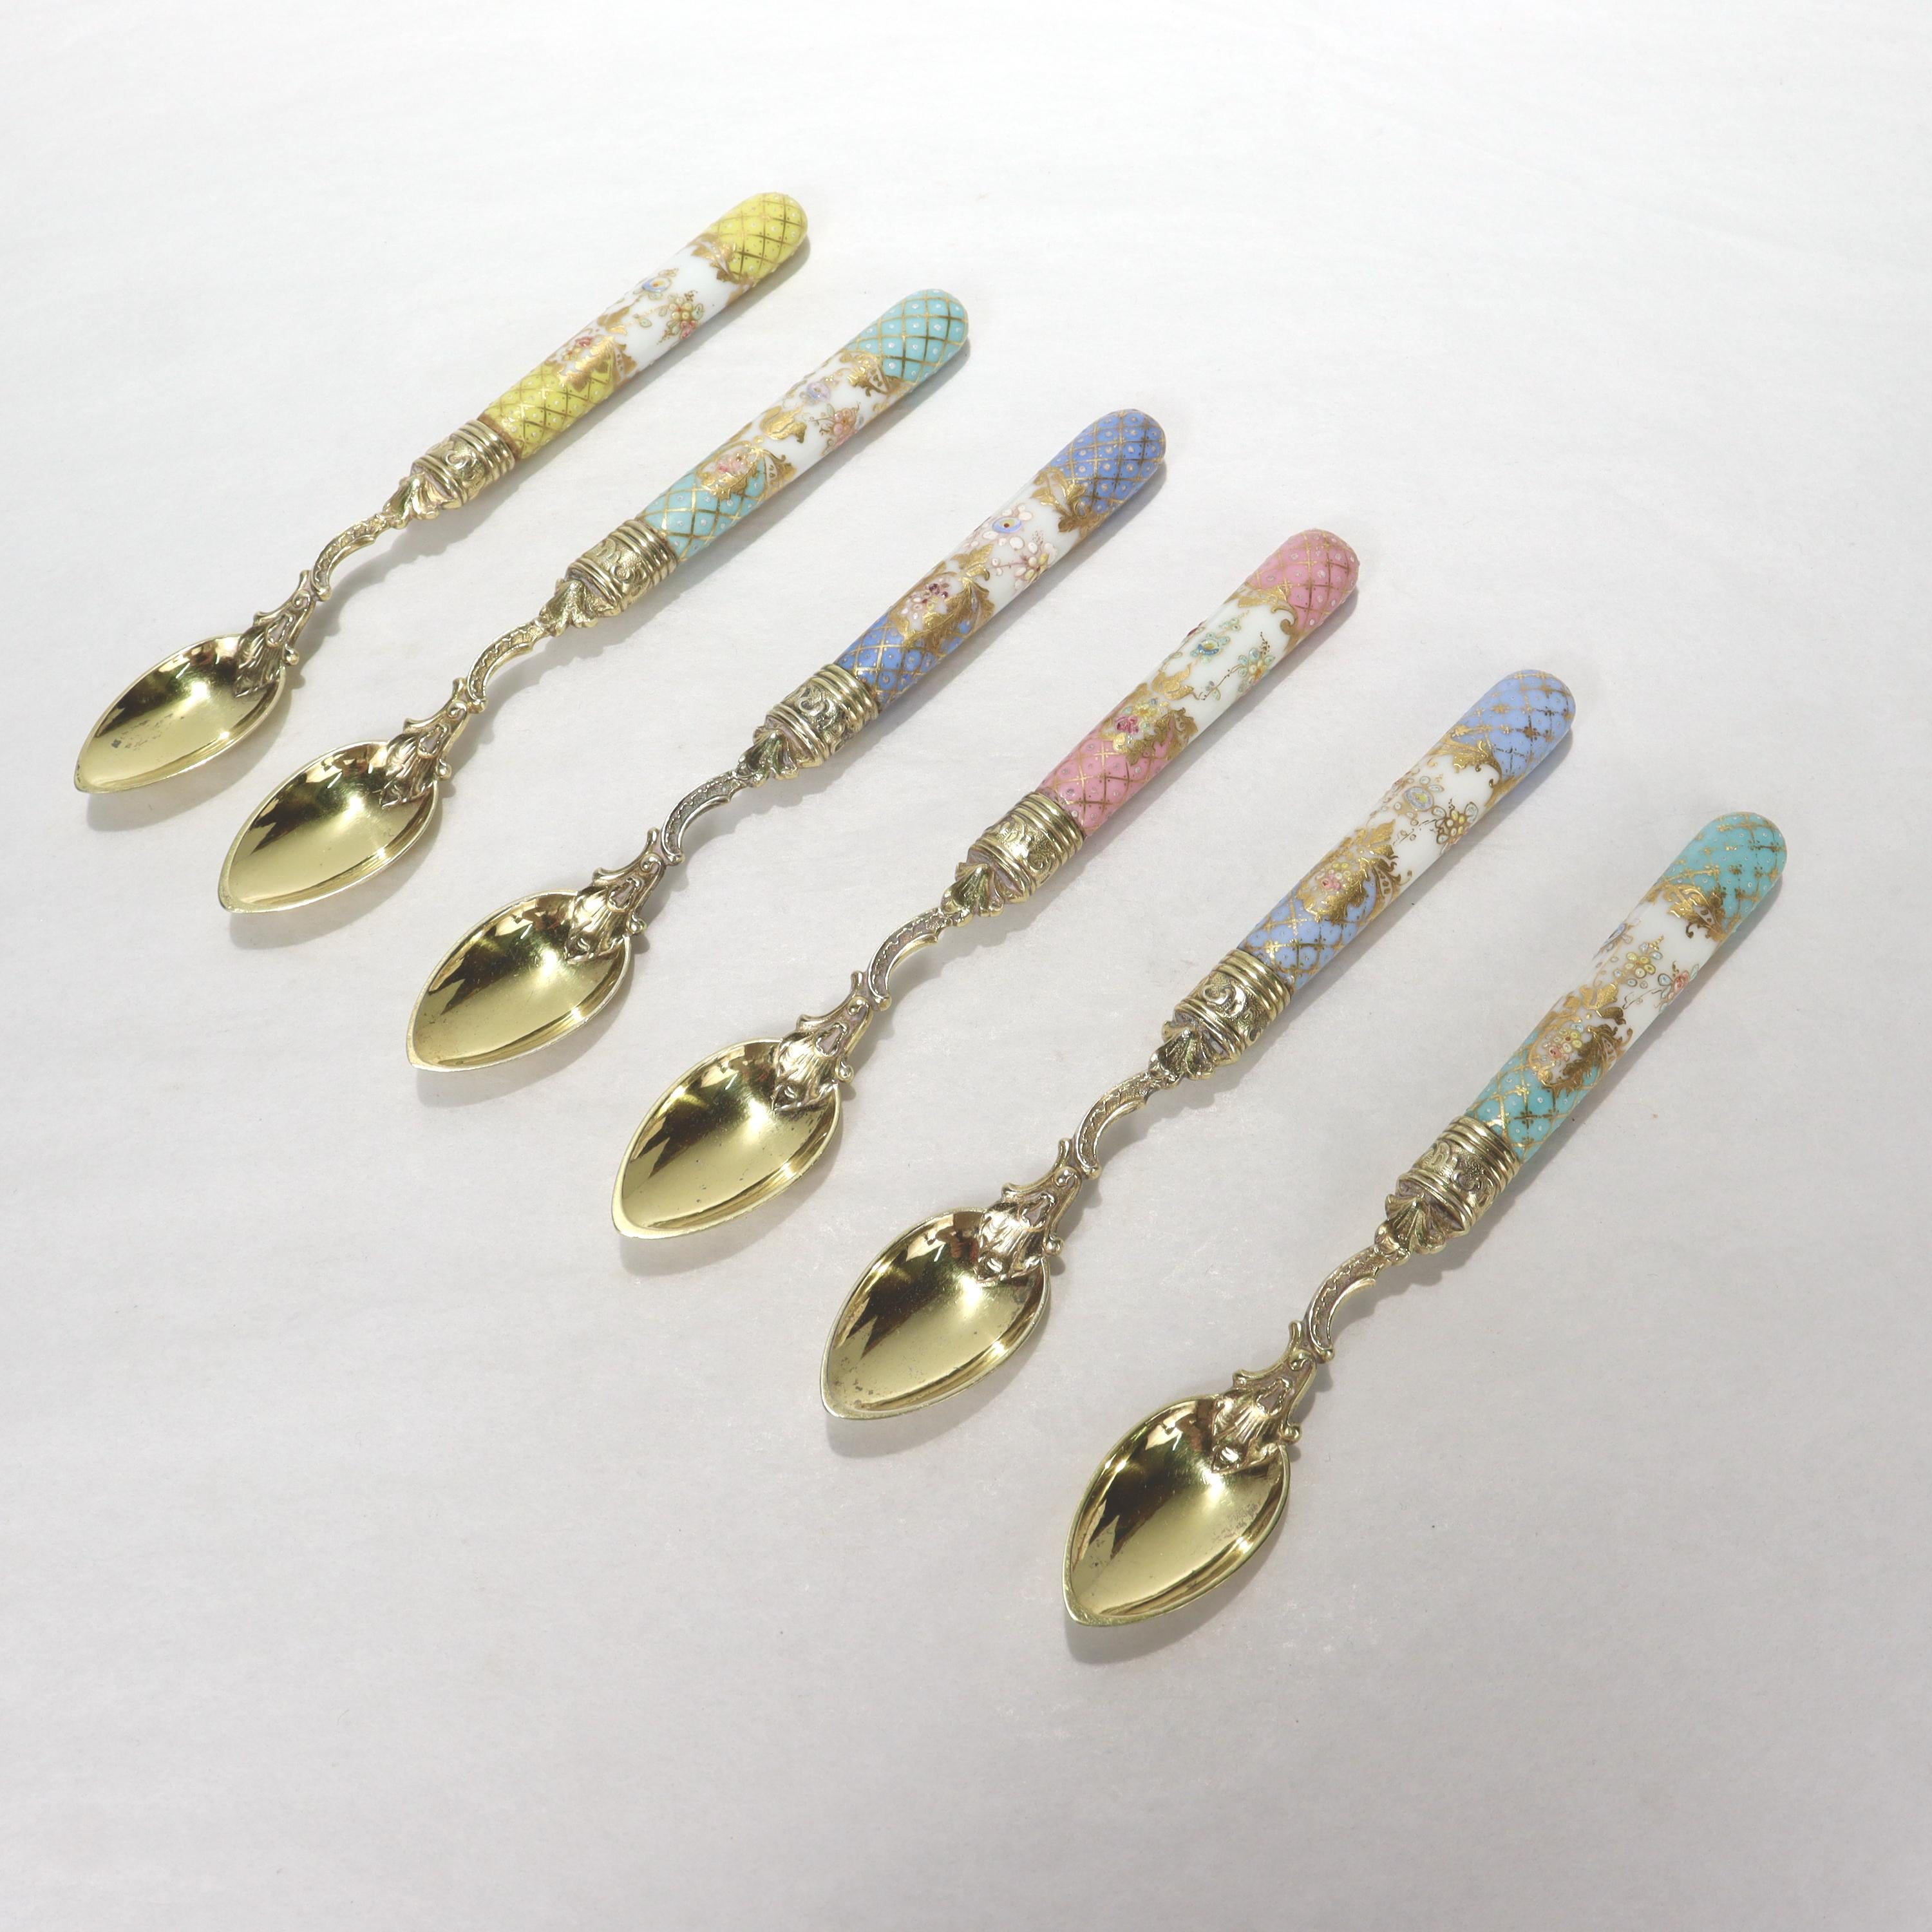 A fine set of 6 antique silver & porcelain dessert (or possibly demitasse) spoons.

By Richard Garten.

In gilt 800 silver. 

With raised enamel jeweling to the Dresden porcelain handles.

Simply a wonderful set of Dresden spoons! 

Date:
Late 19th